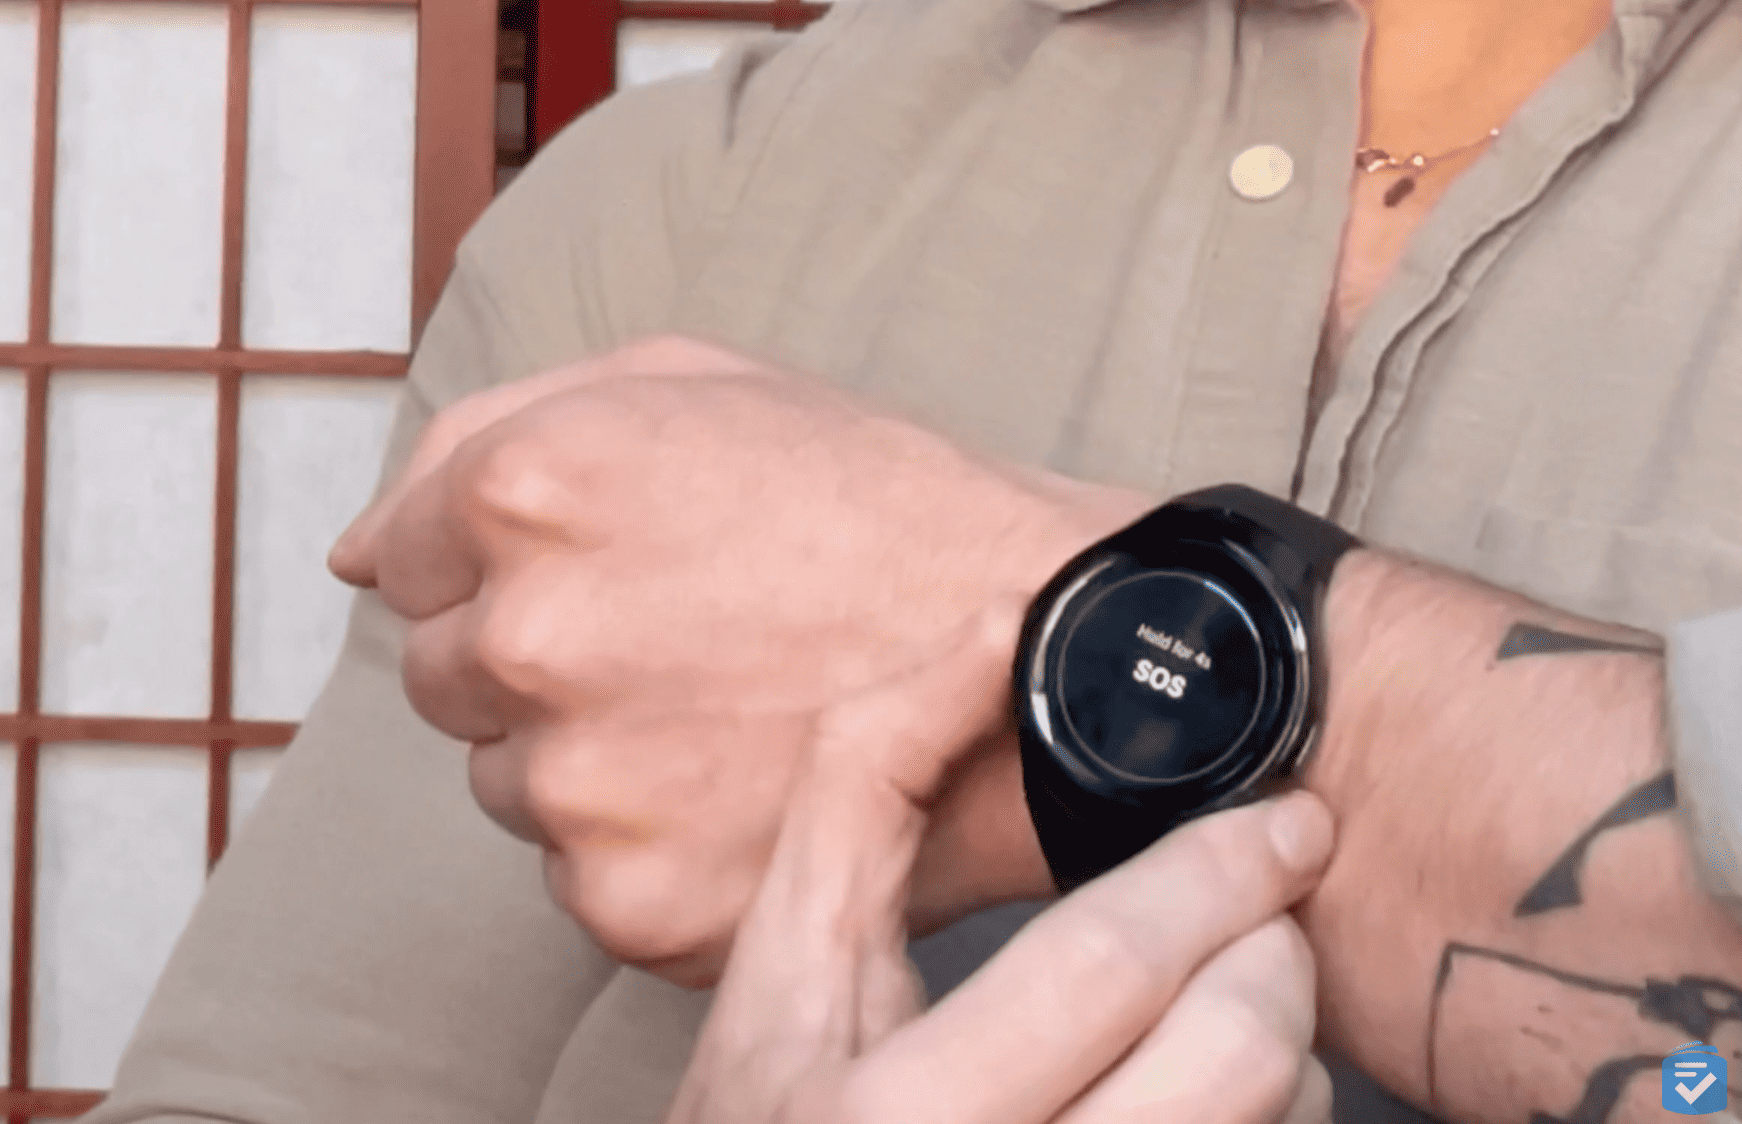 Placing a Call with the SOS Smartwatch